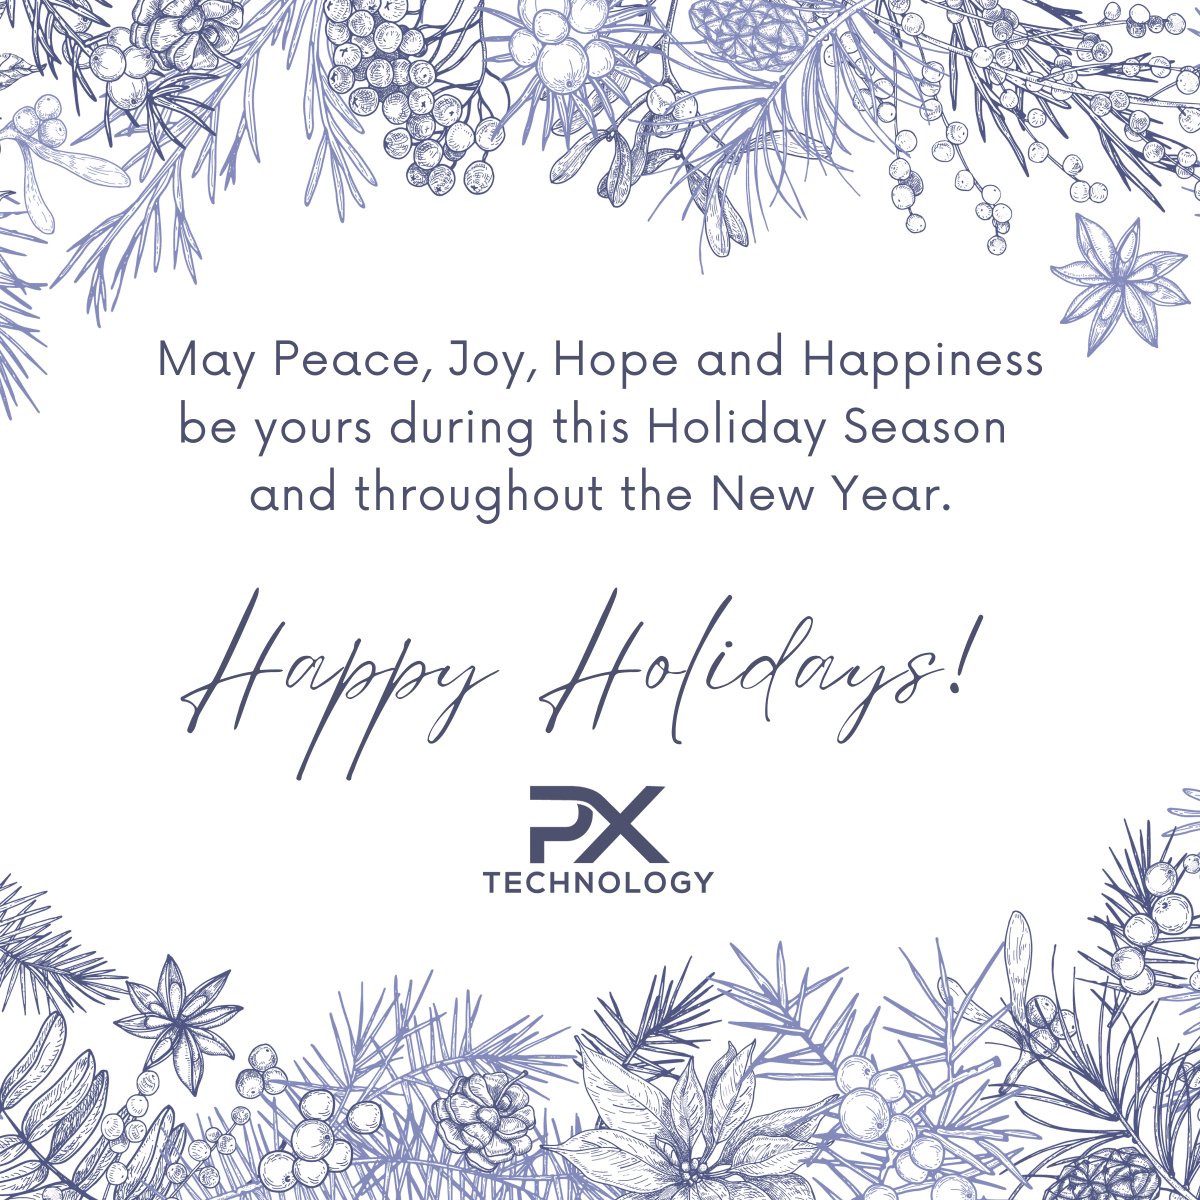 Happy Holidays from all of us at PX Technology!